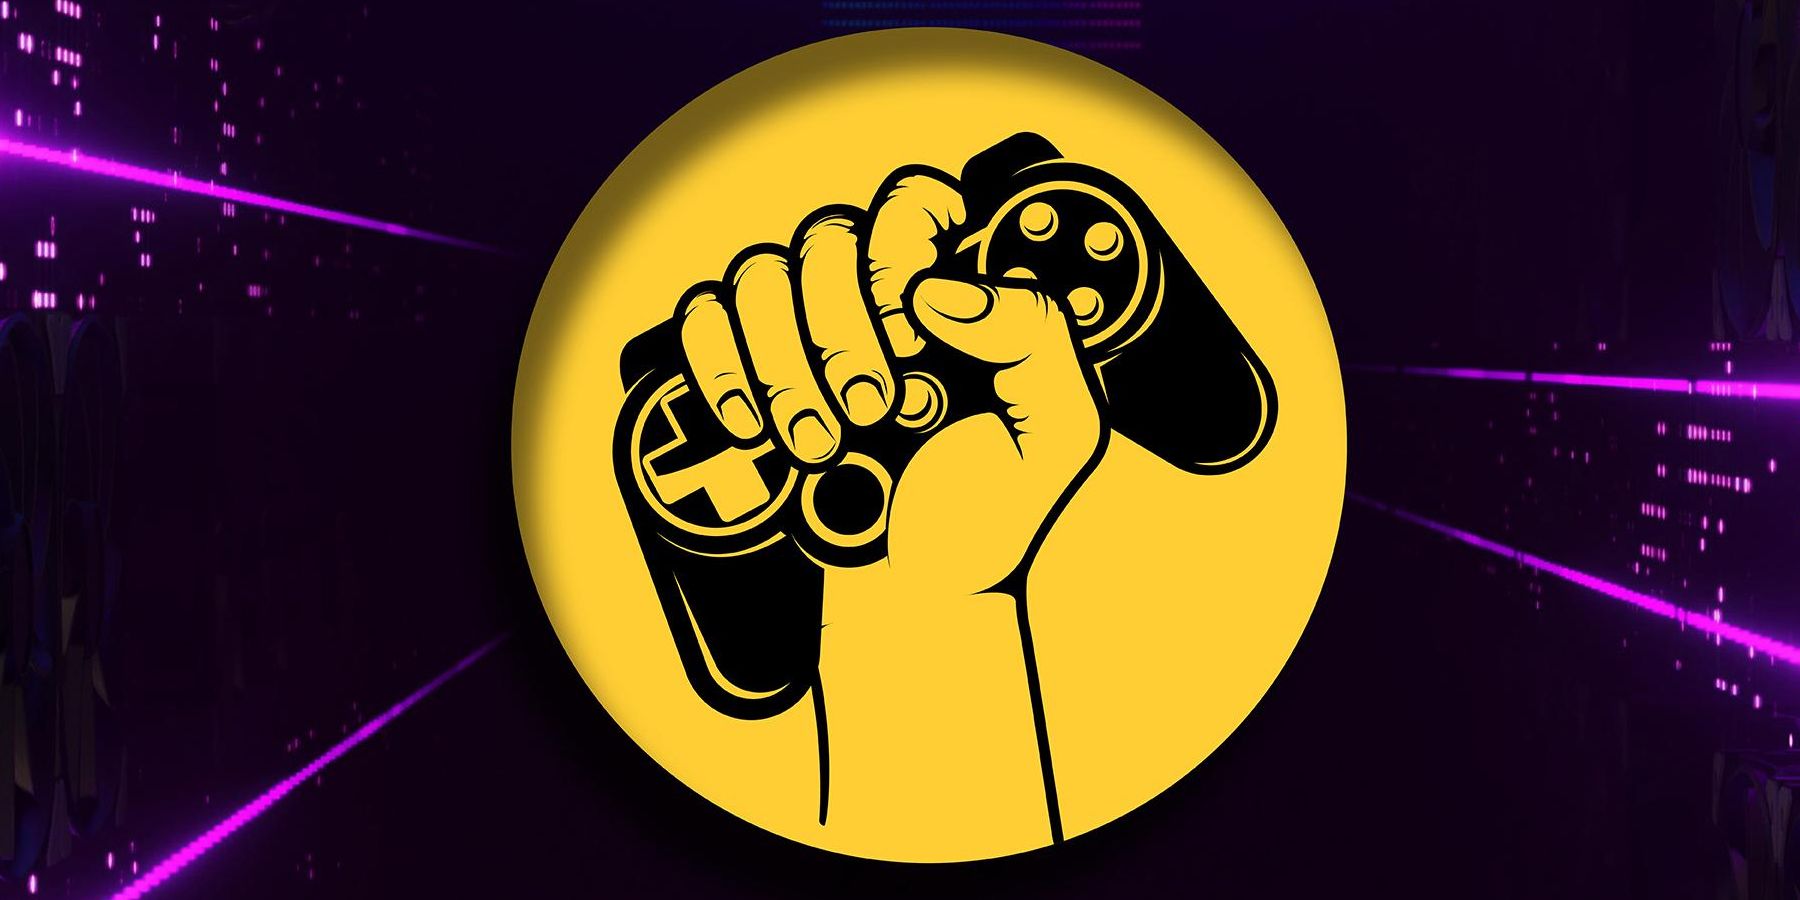 An image of a union hand raising a game controller in the air in a yellow circle against a black and purple background.